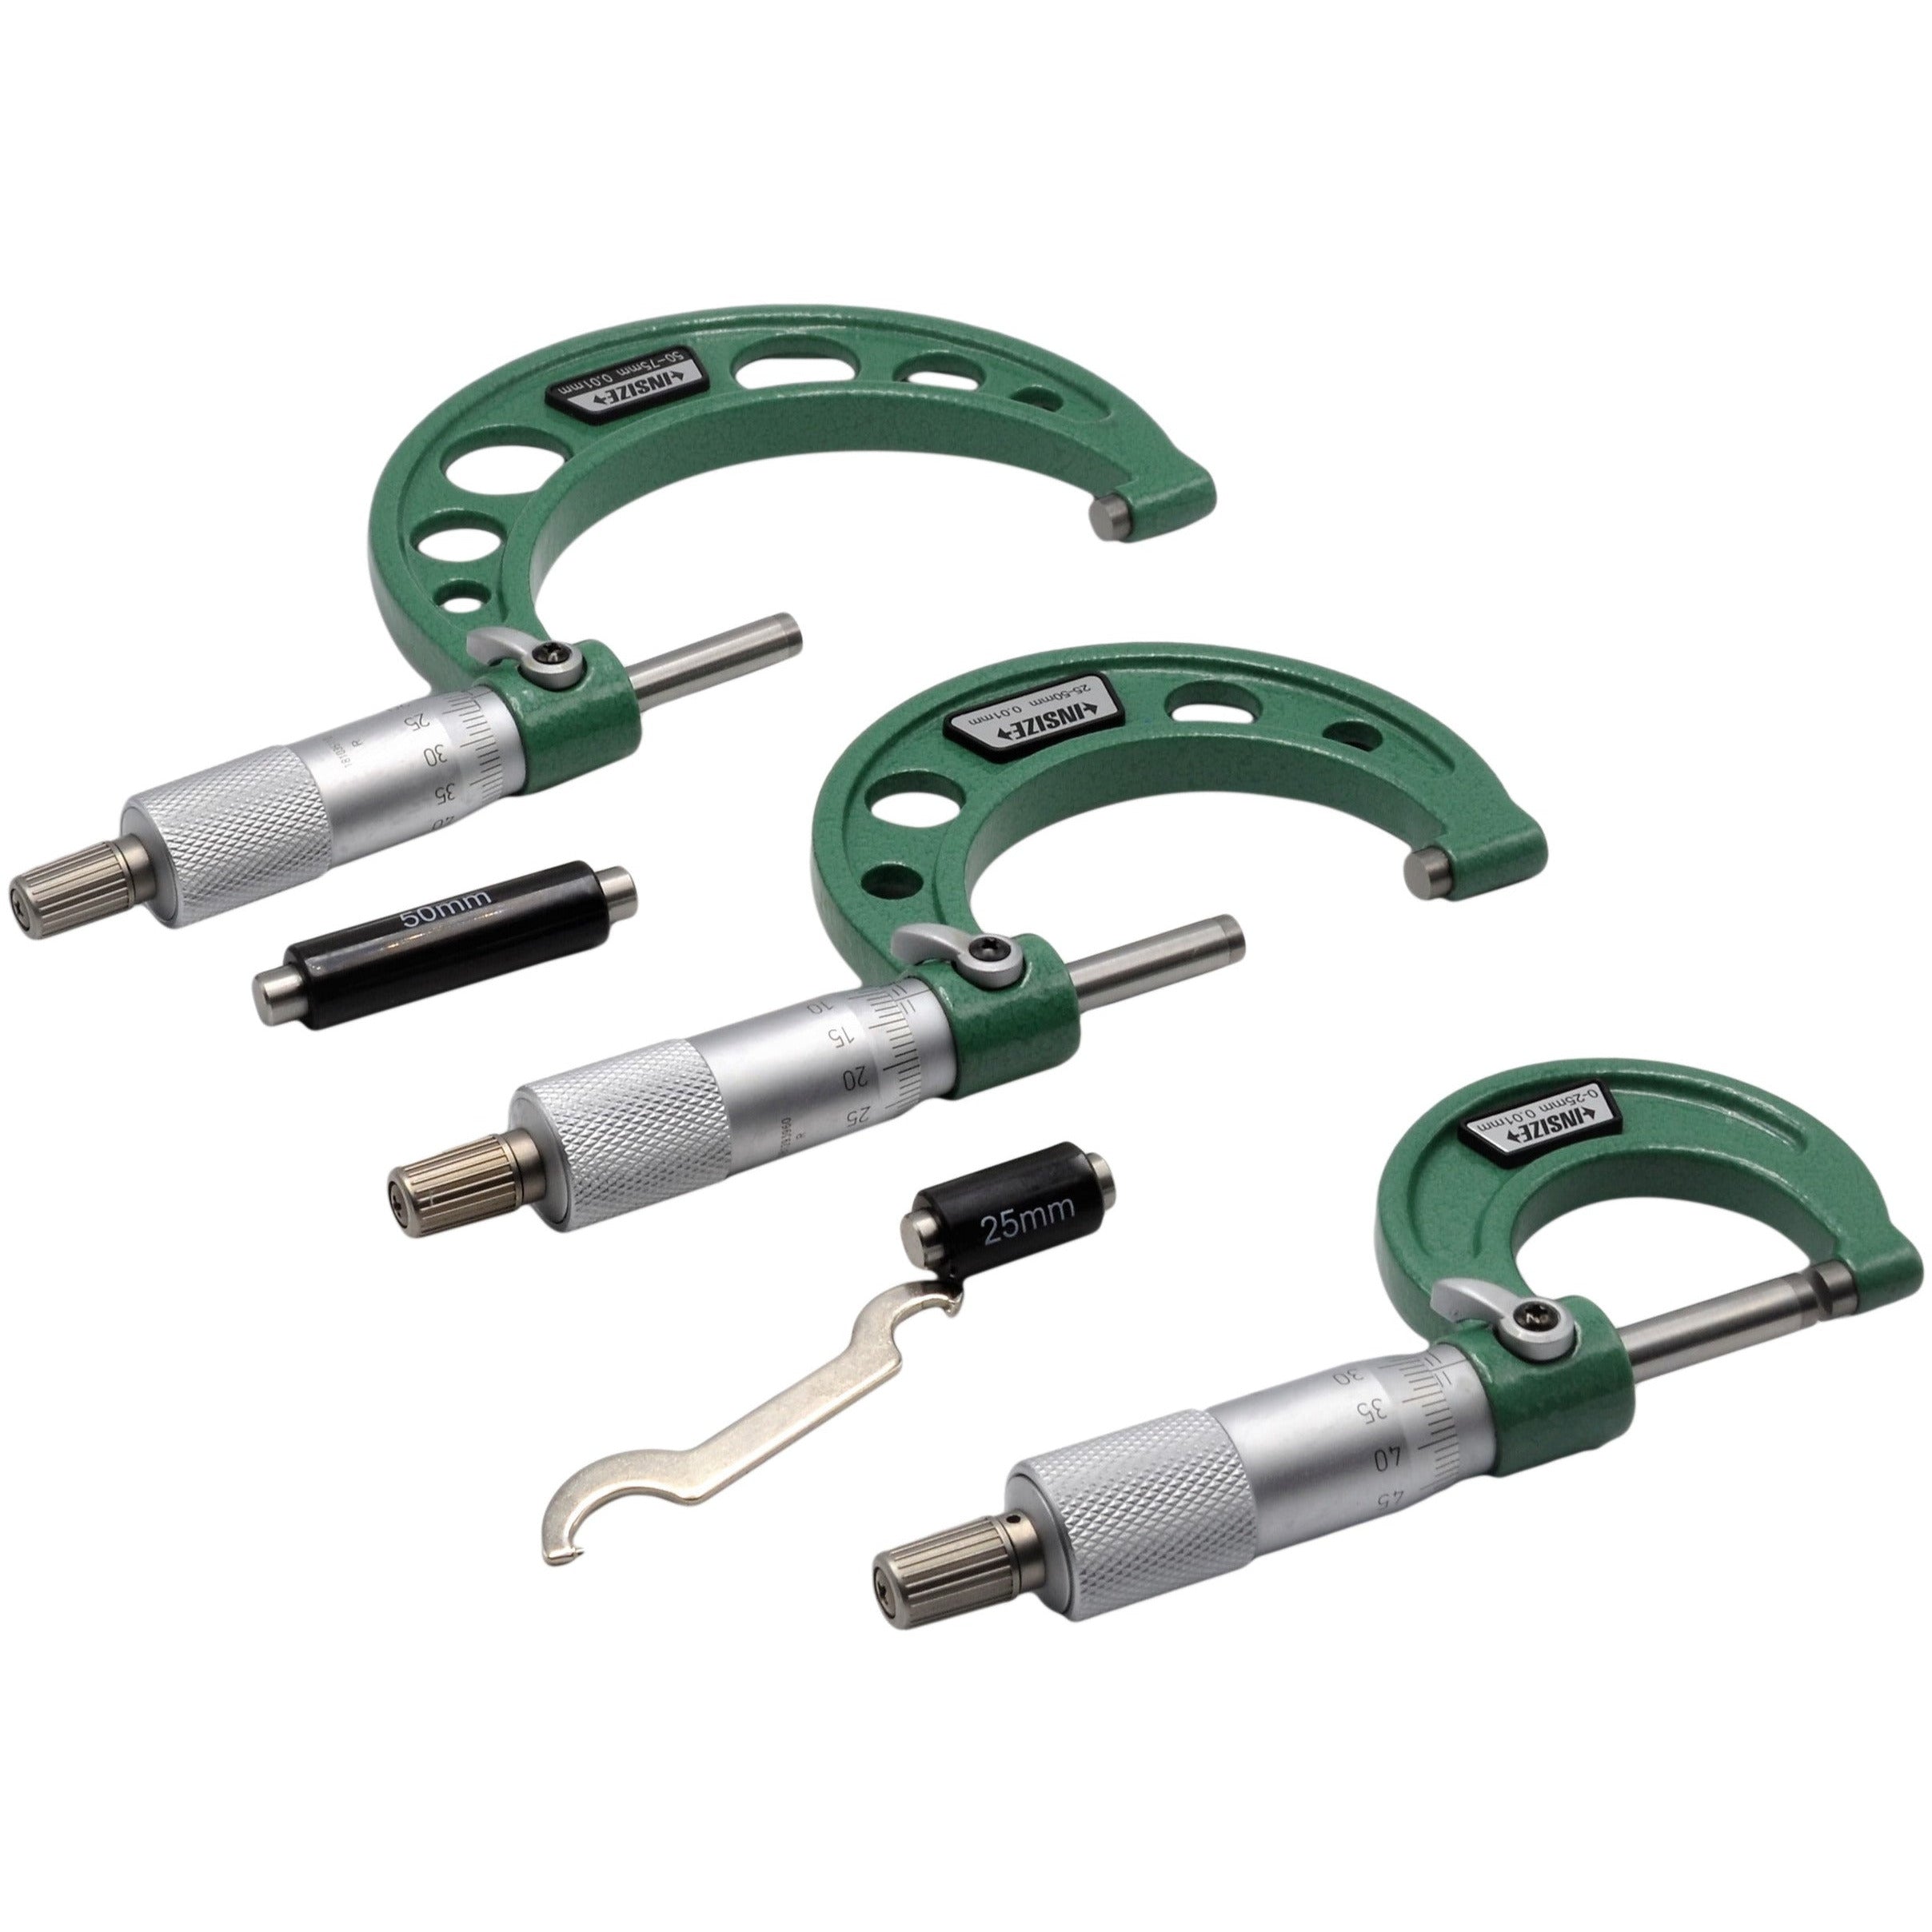 Insize Outside Micrometer Set-3 Piece Series  0-75mm Range Series 3203-753A